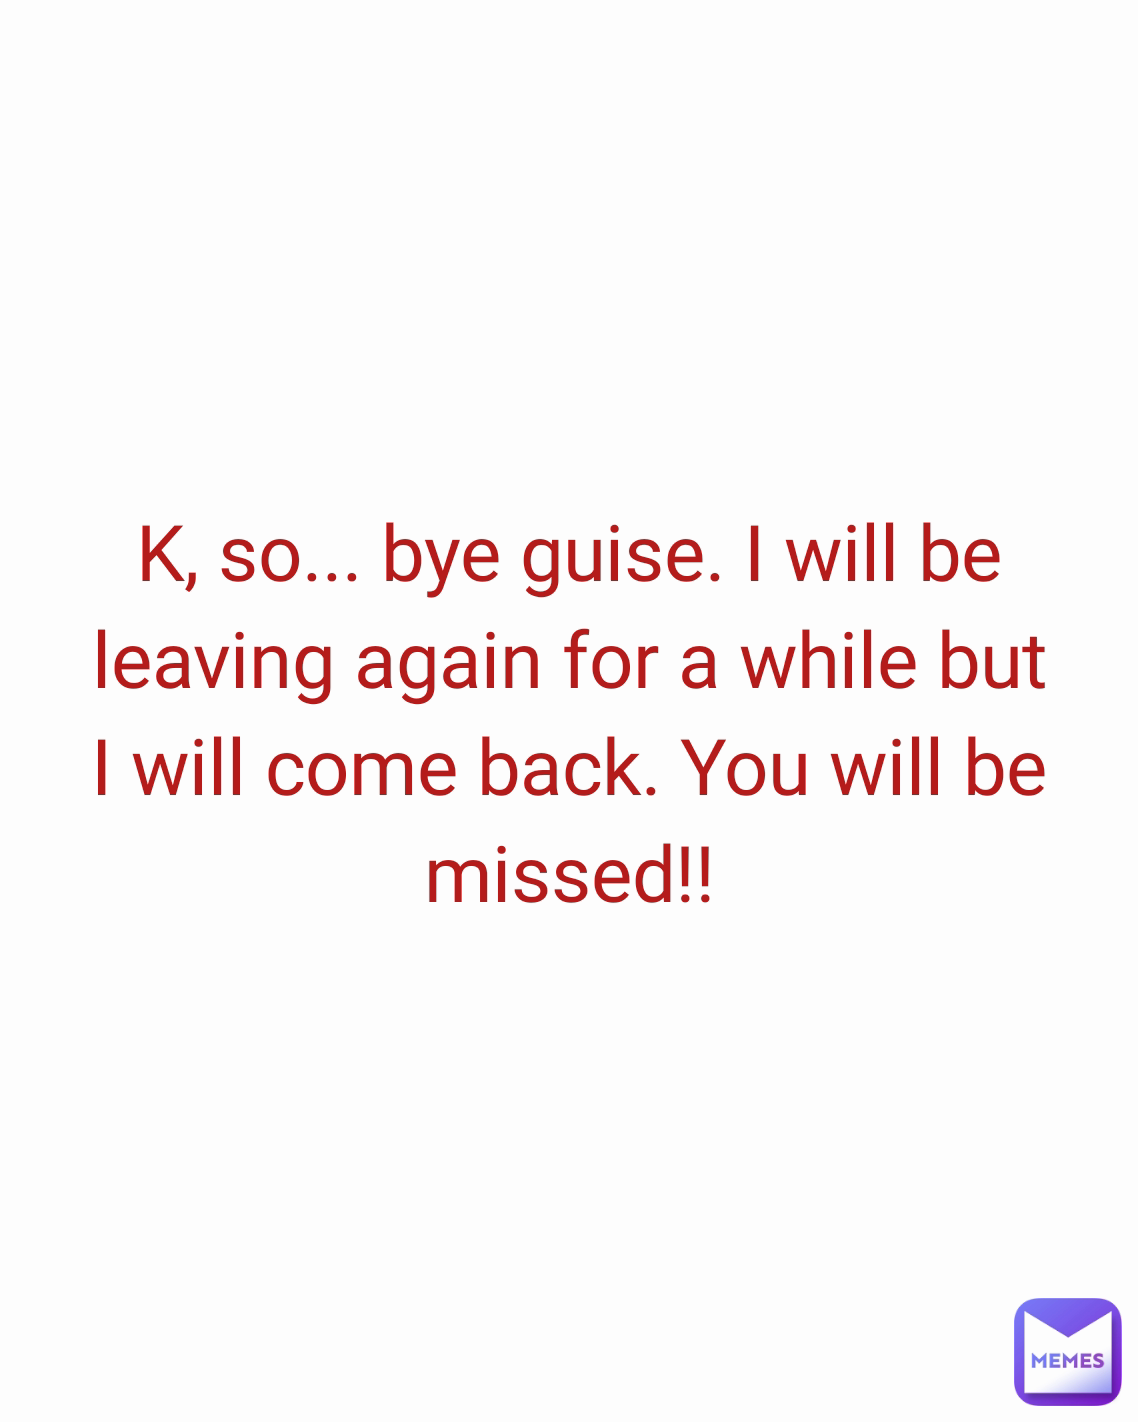 K, so... bye guise. I will be leaving again for a while but I will come back. You will be missed!!